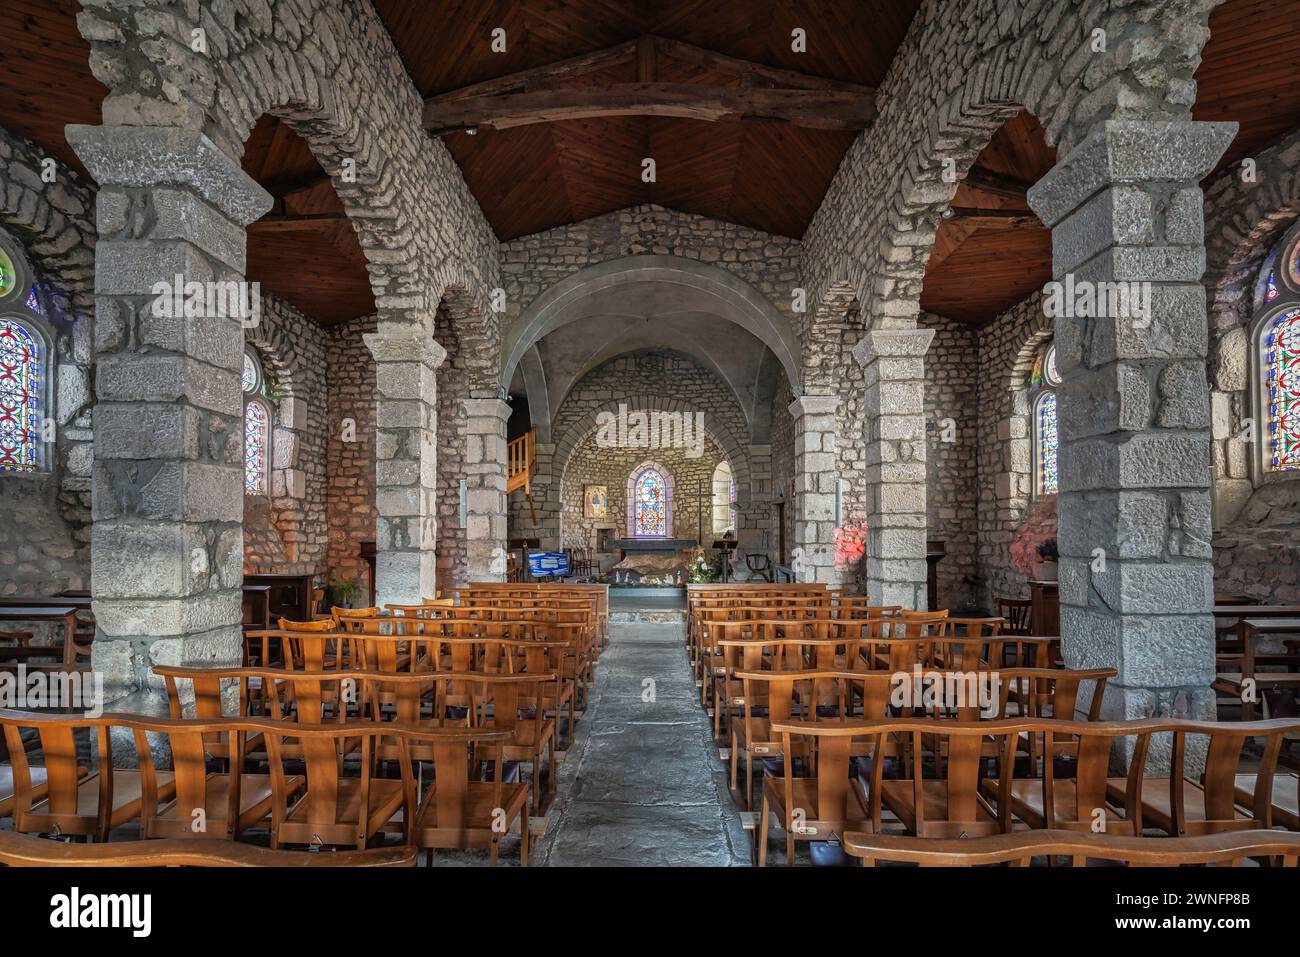 Interior of the medieval stone church dedicated to Saint Pierre in Chambles. Chambles, Loire department, Auvergne-Rhône-Alpes region, France, Europe Stock Photo